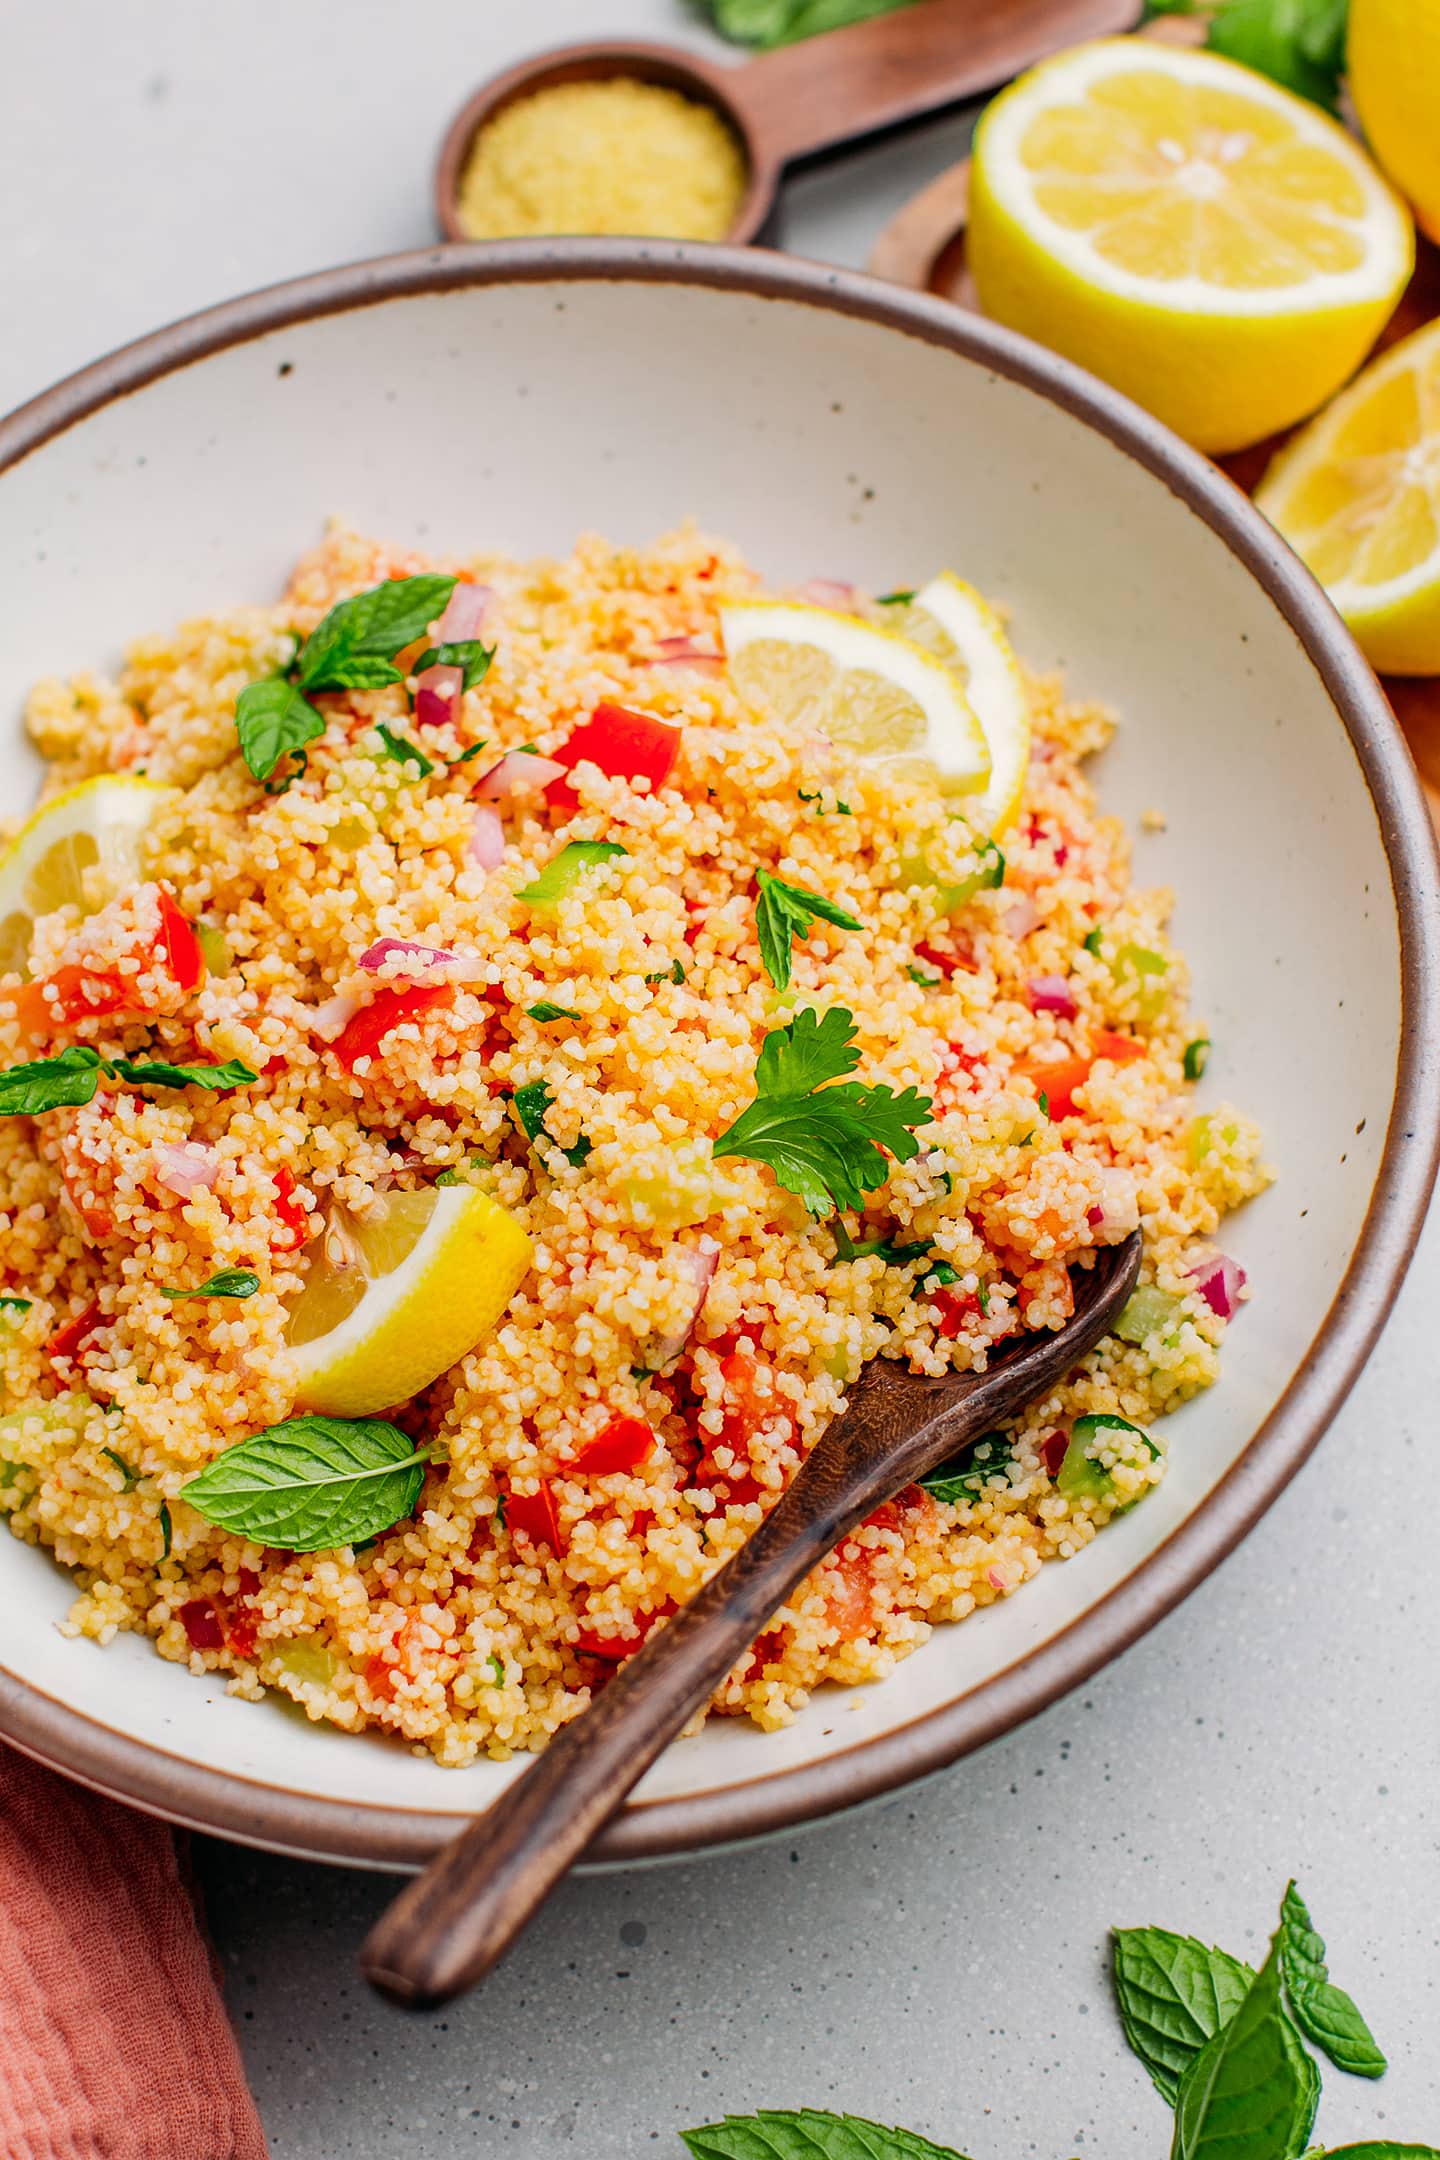 Couscous salad with tomatoes, cucumbers, and fresh herbs.